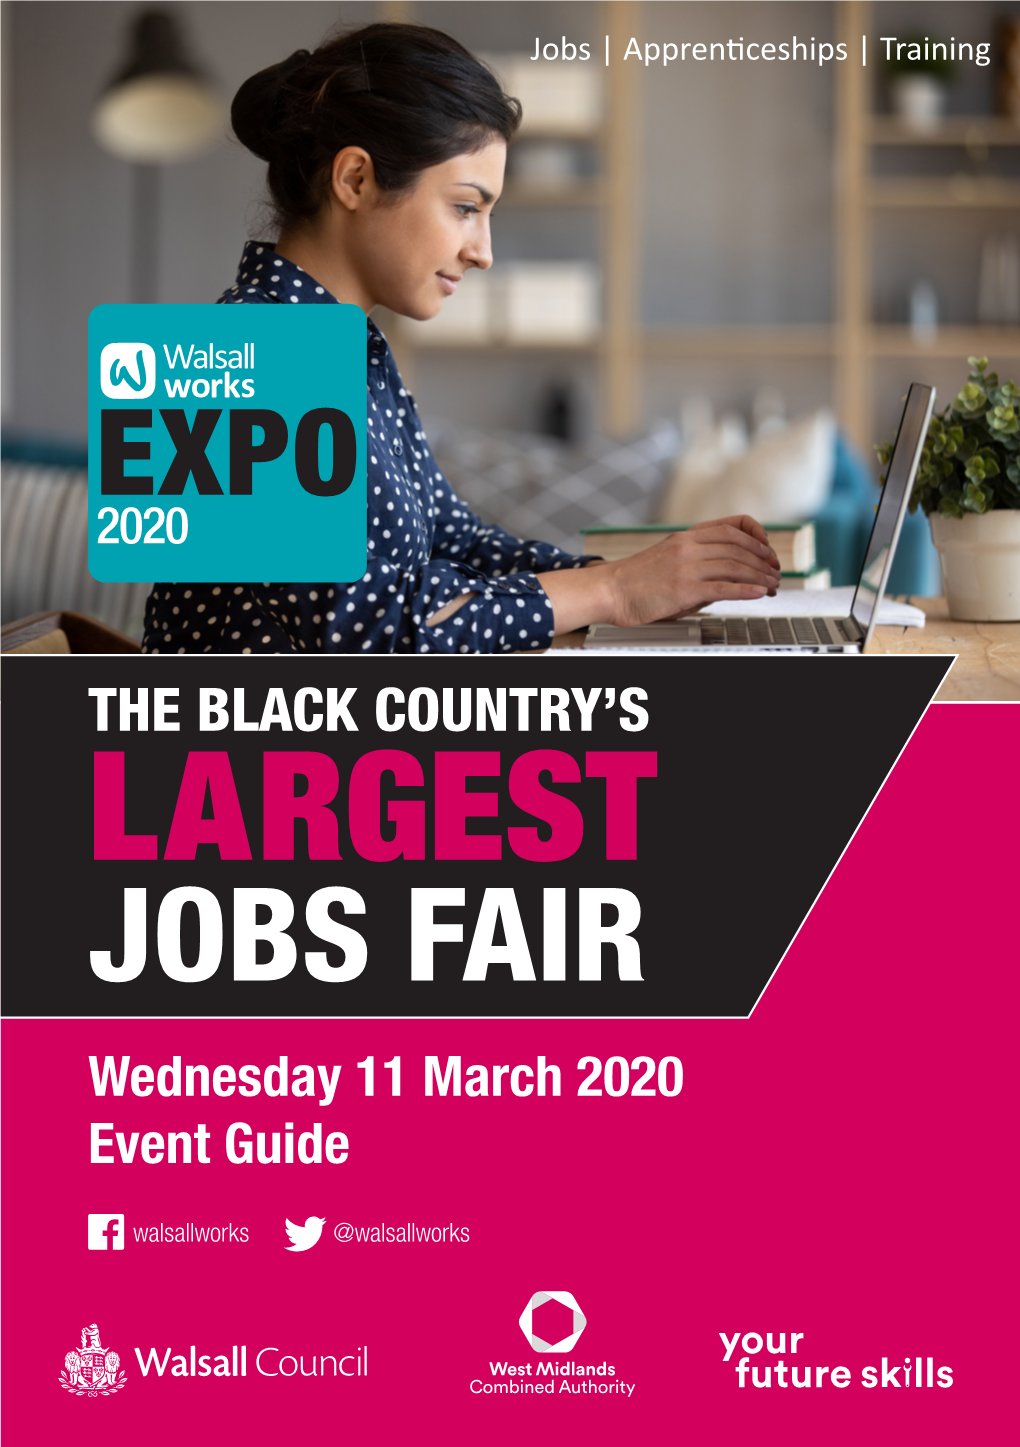 LARGEST JOBS FAIR Wednesday 11 March 2020 Event Guide